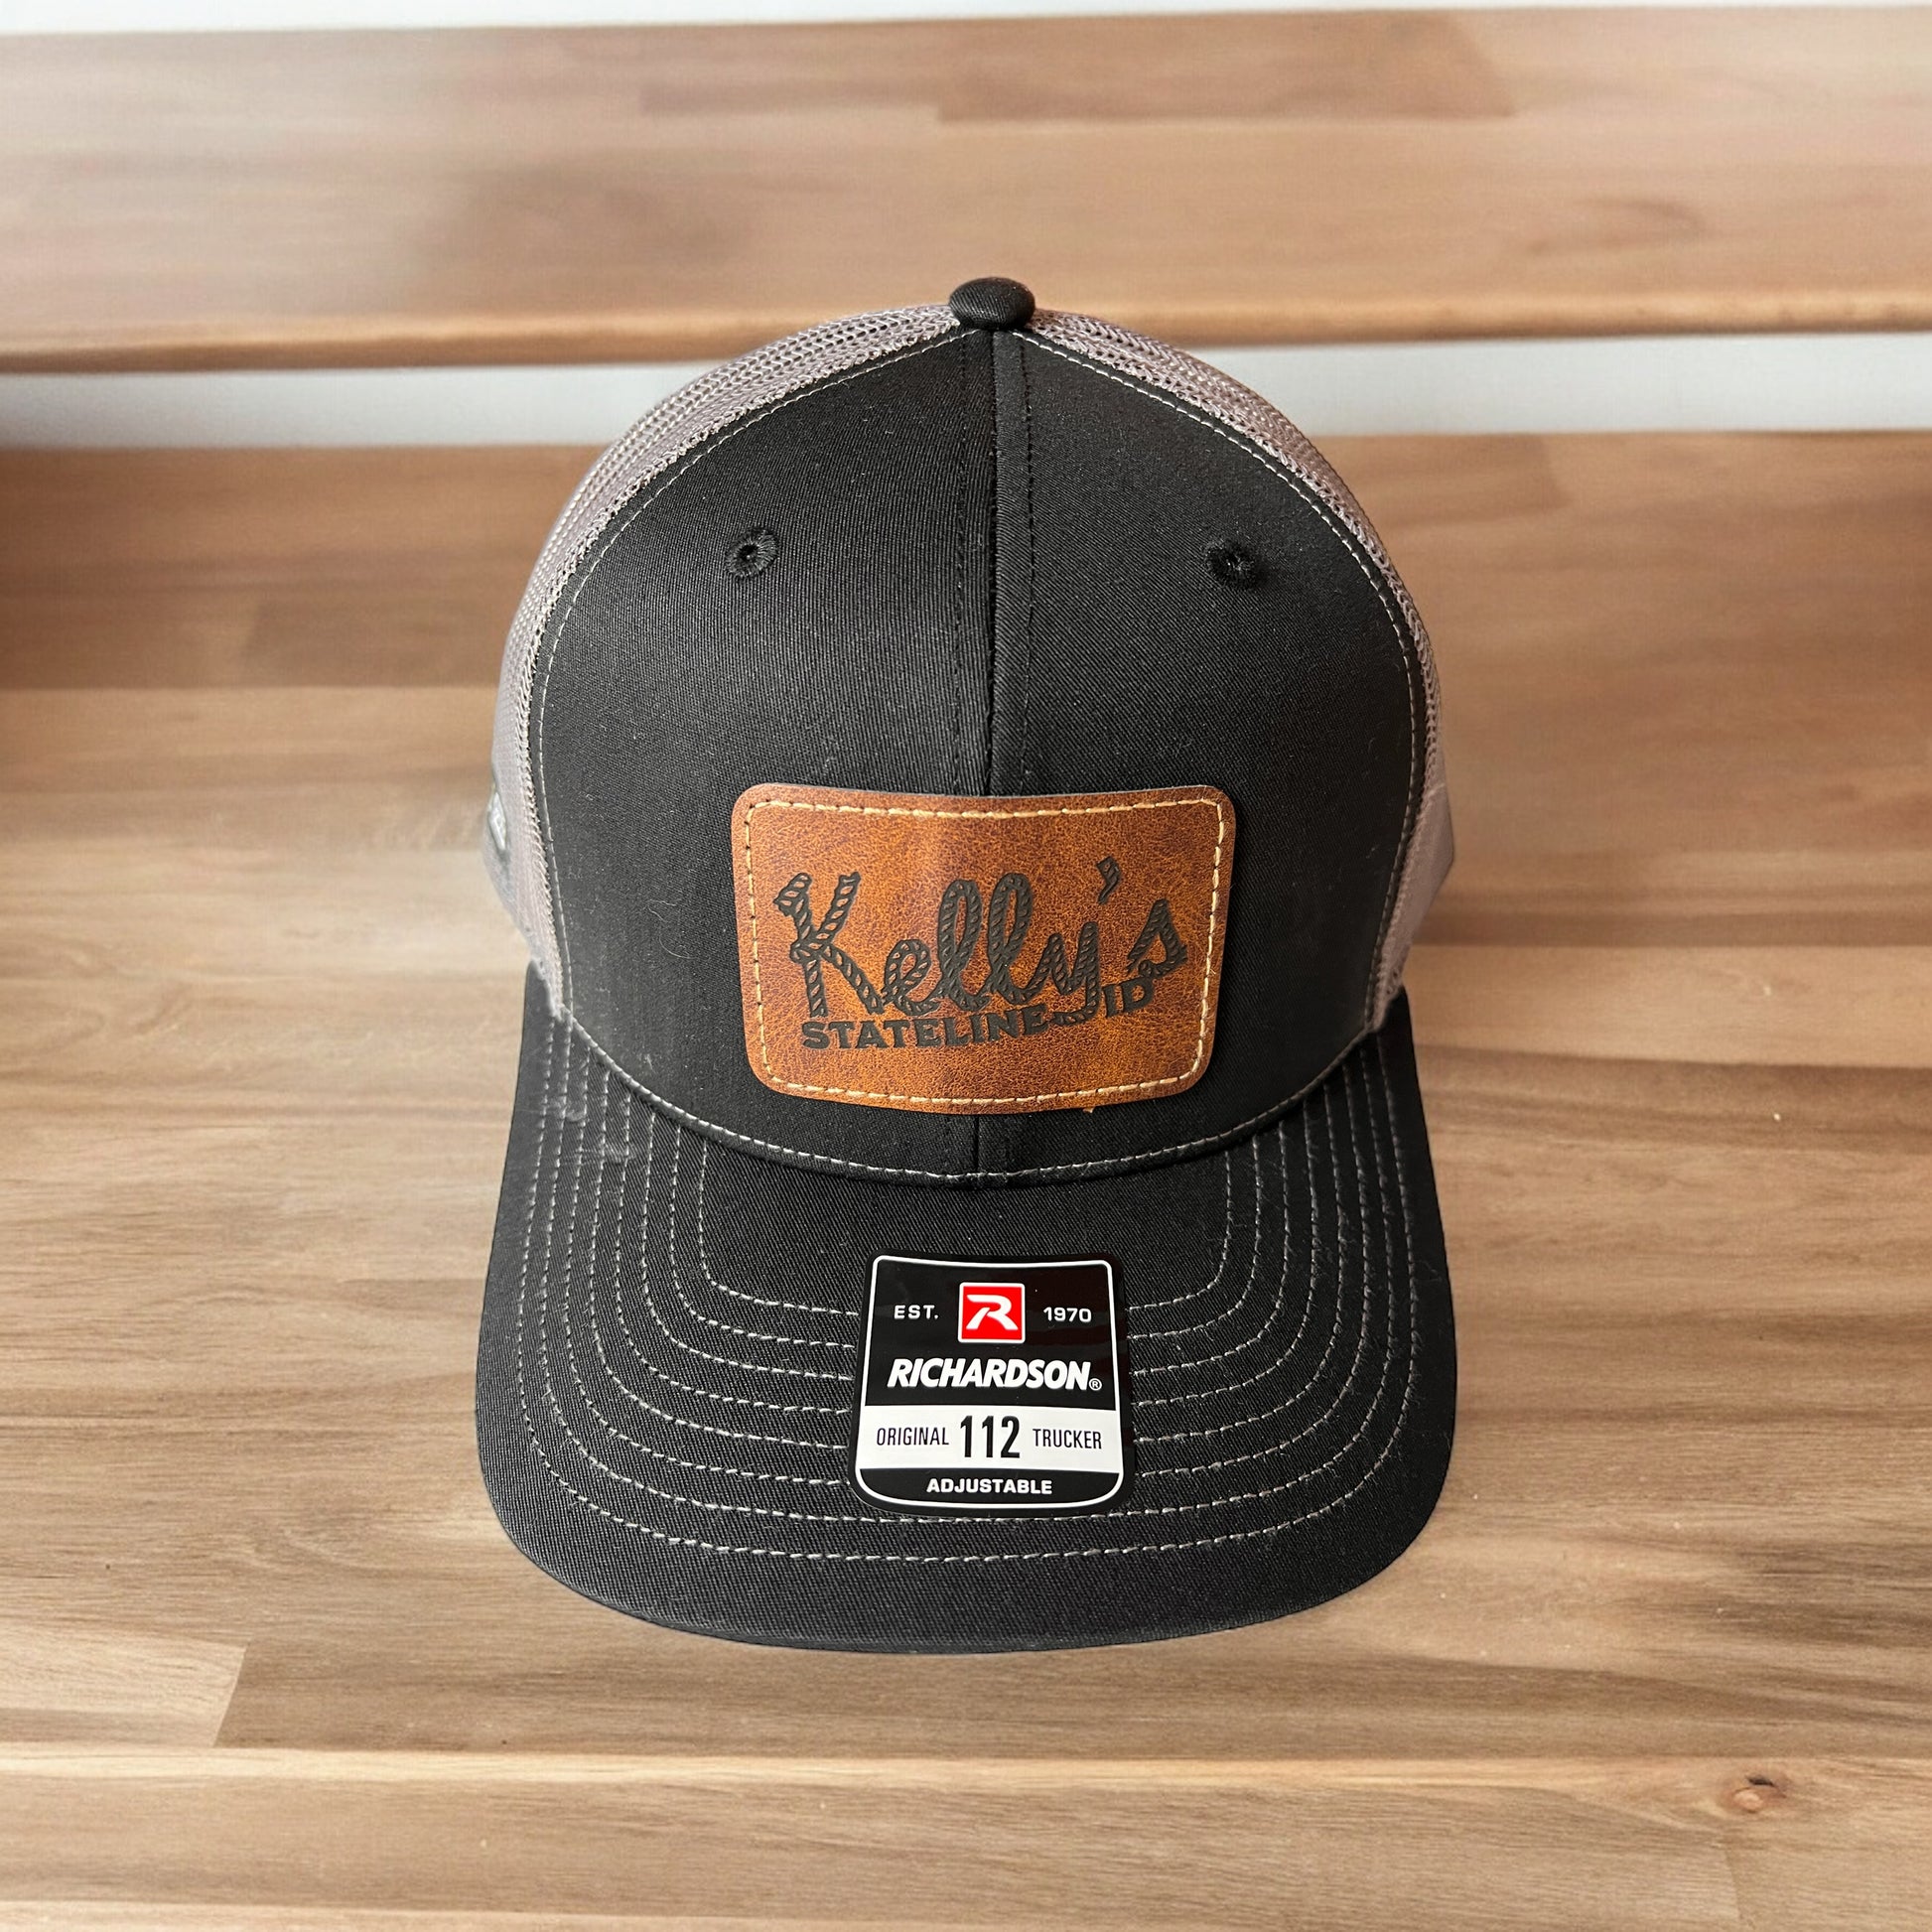 Image of the Kelly Hughes Stateline Richardson Cap in Black/Charcoal, featuring a dark brown patch and integrated ID slot, perfect for showcasing style and convenience at events with durable construction and a comfortable fit.